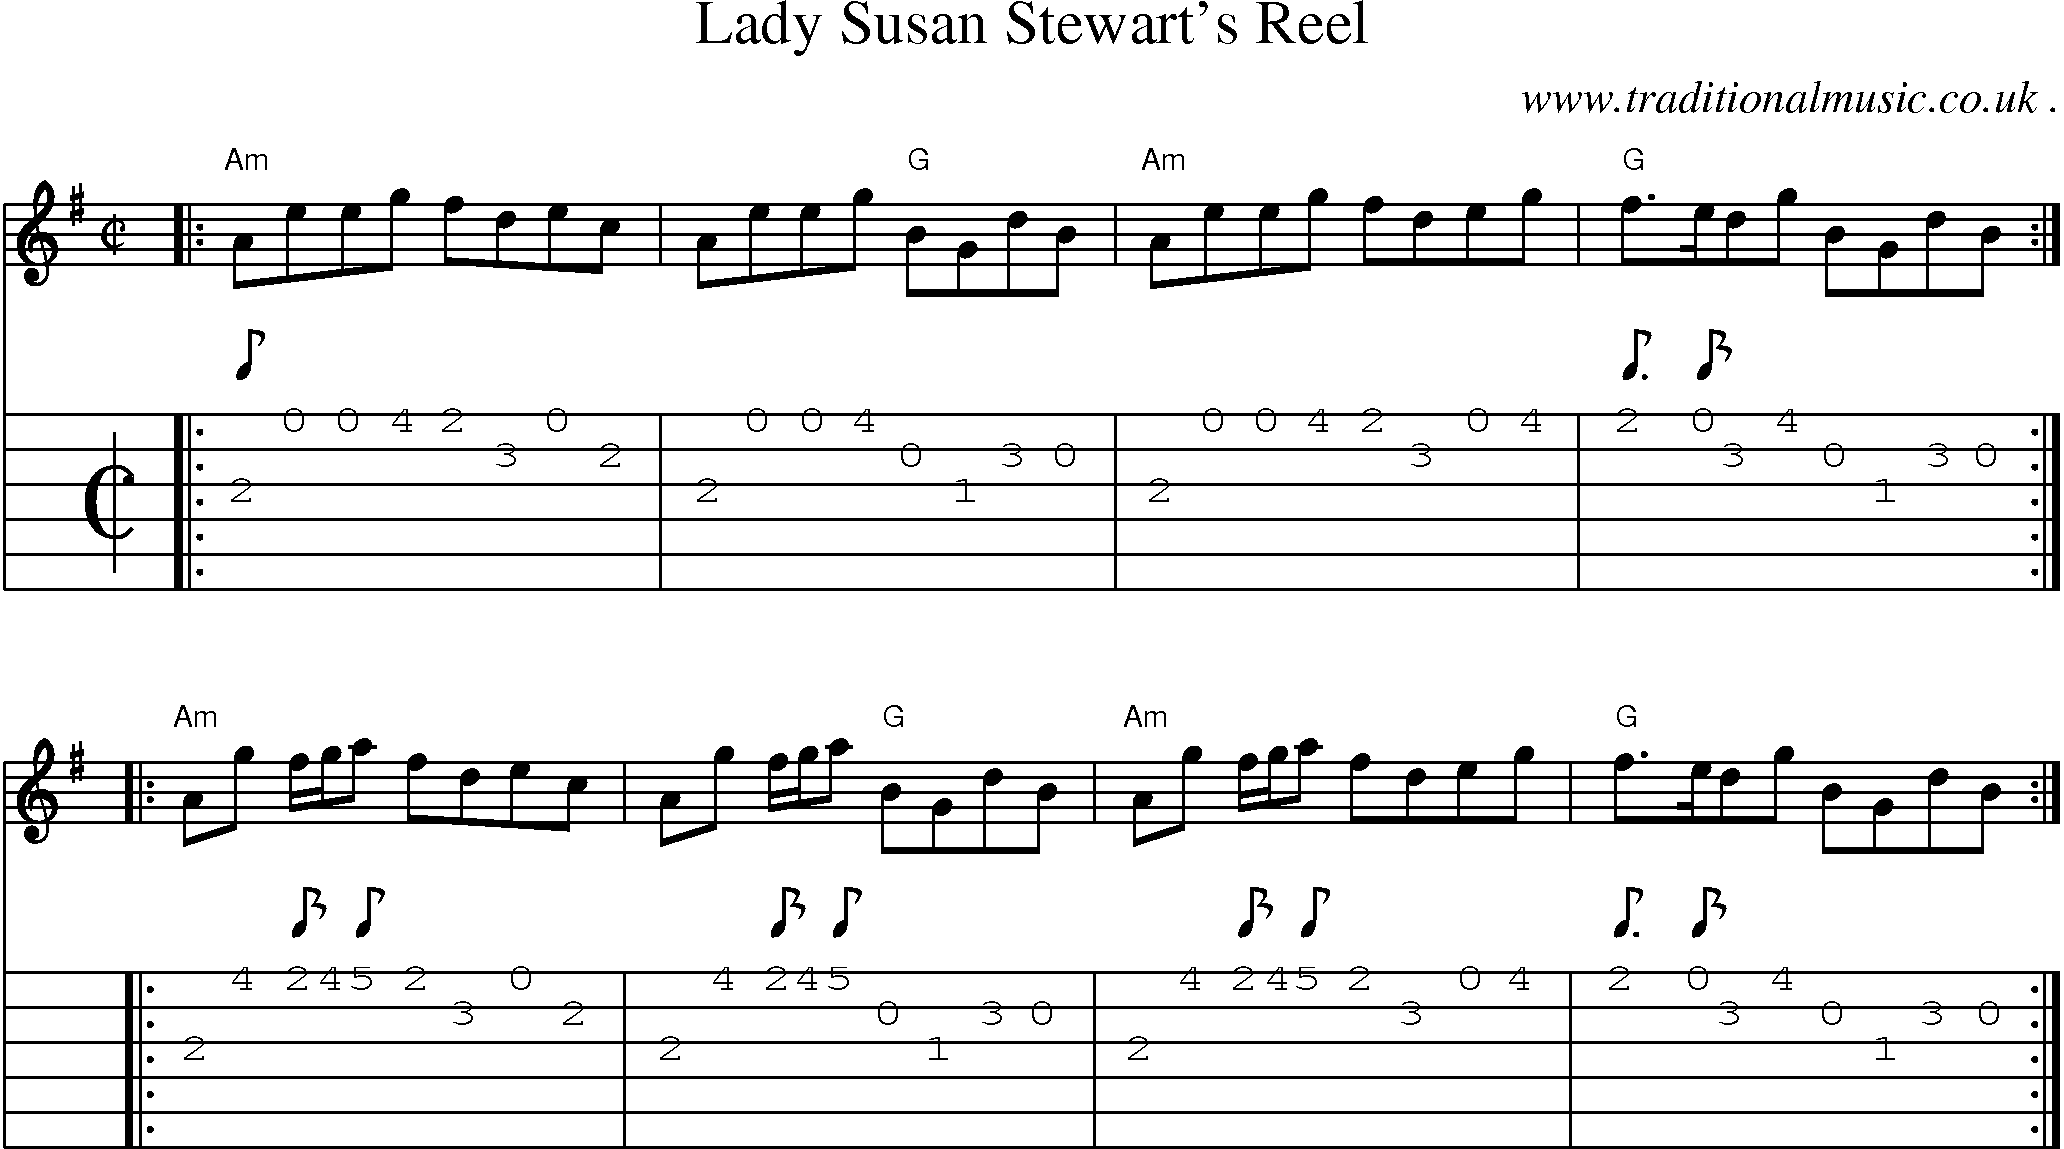 Sheet-music  score, Chords and Guitar Tabs for Lady Susan Stewarts Reel